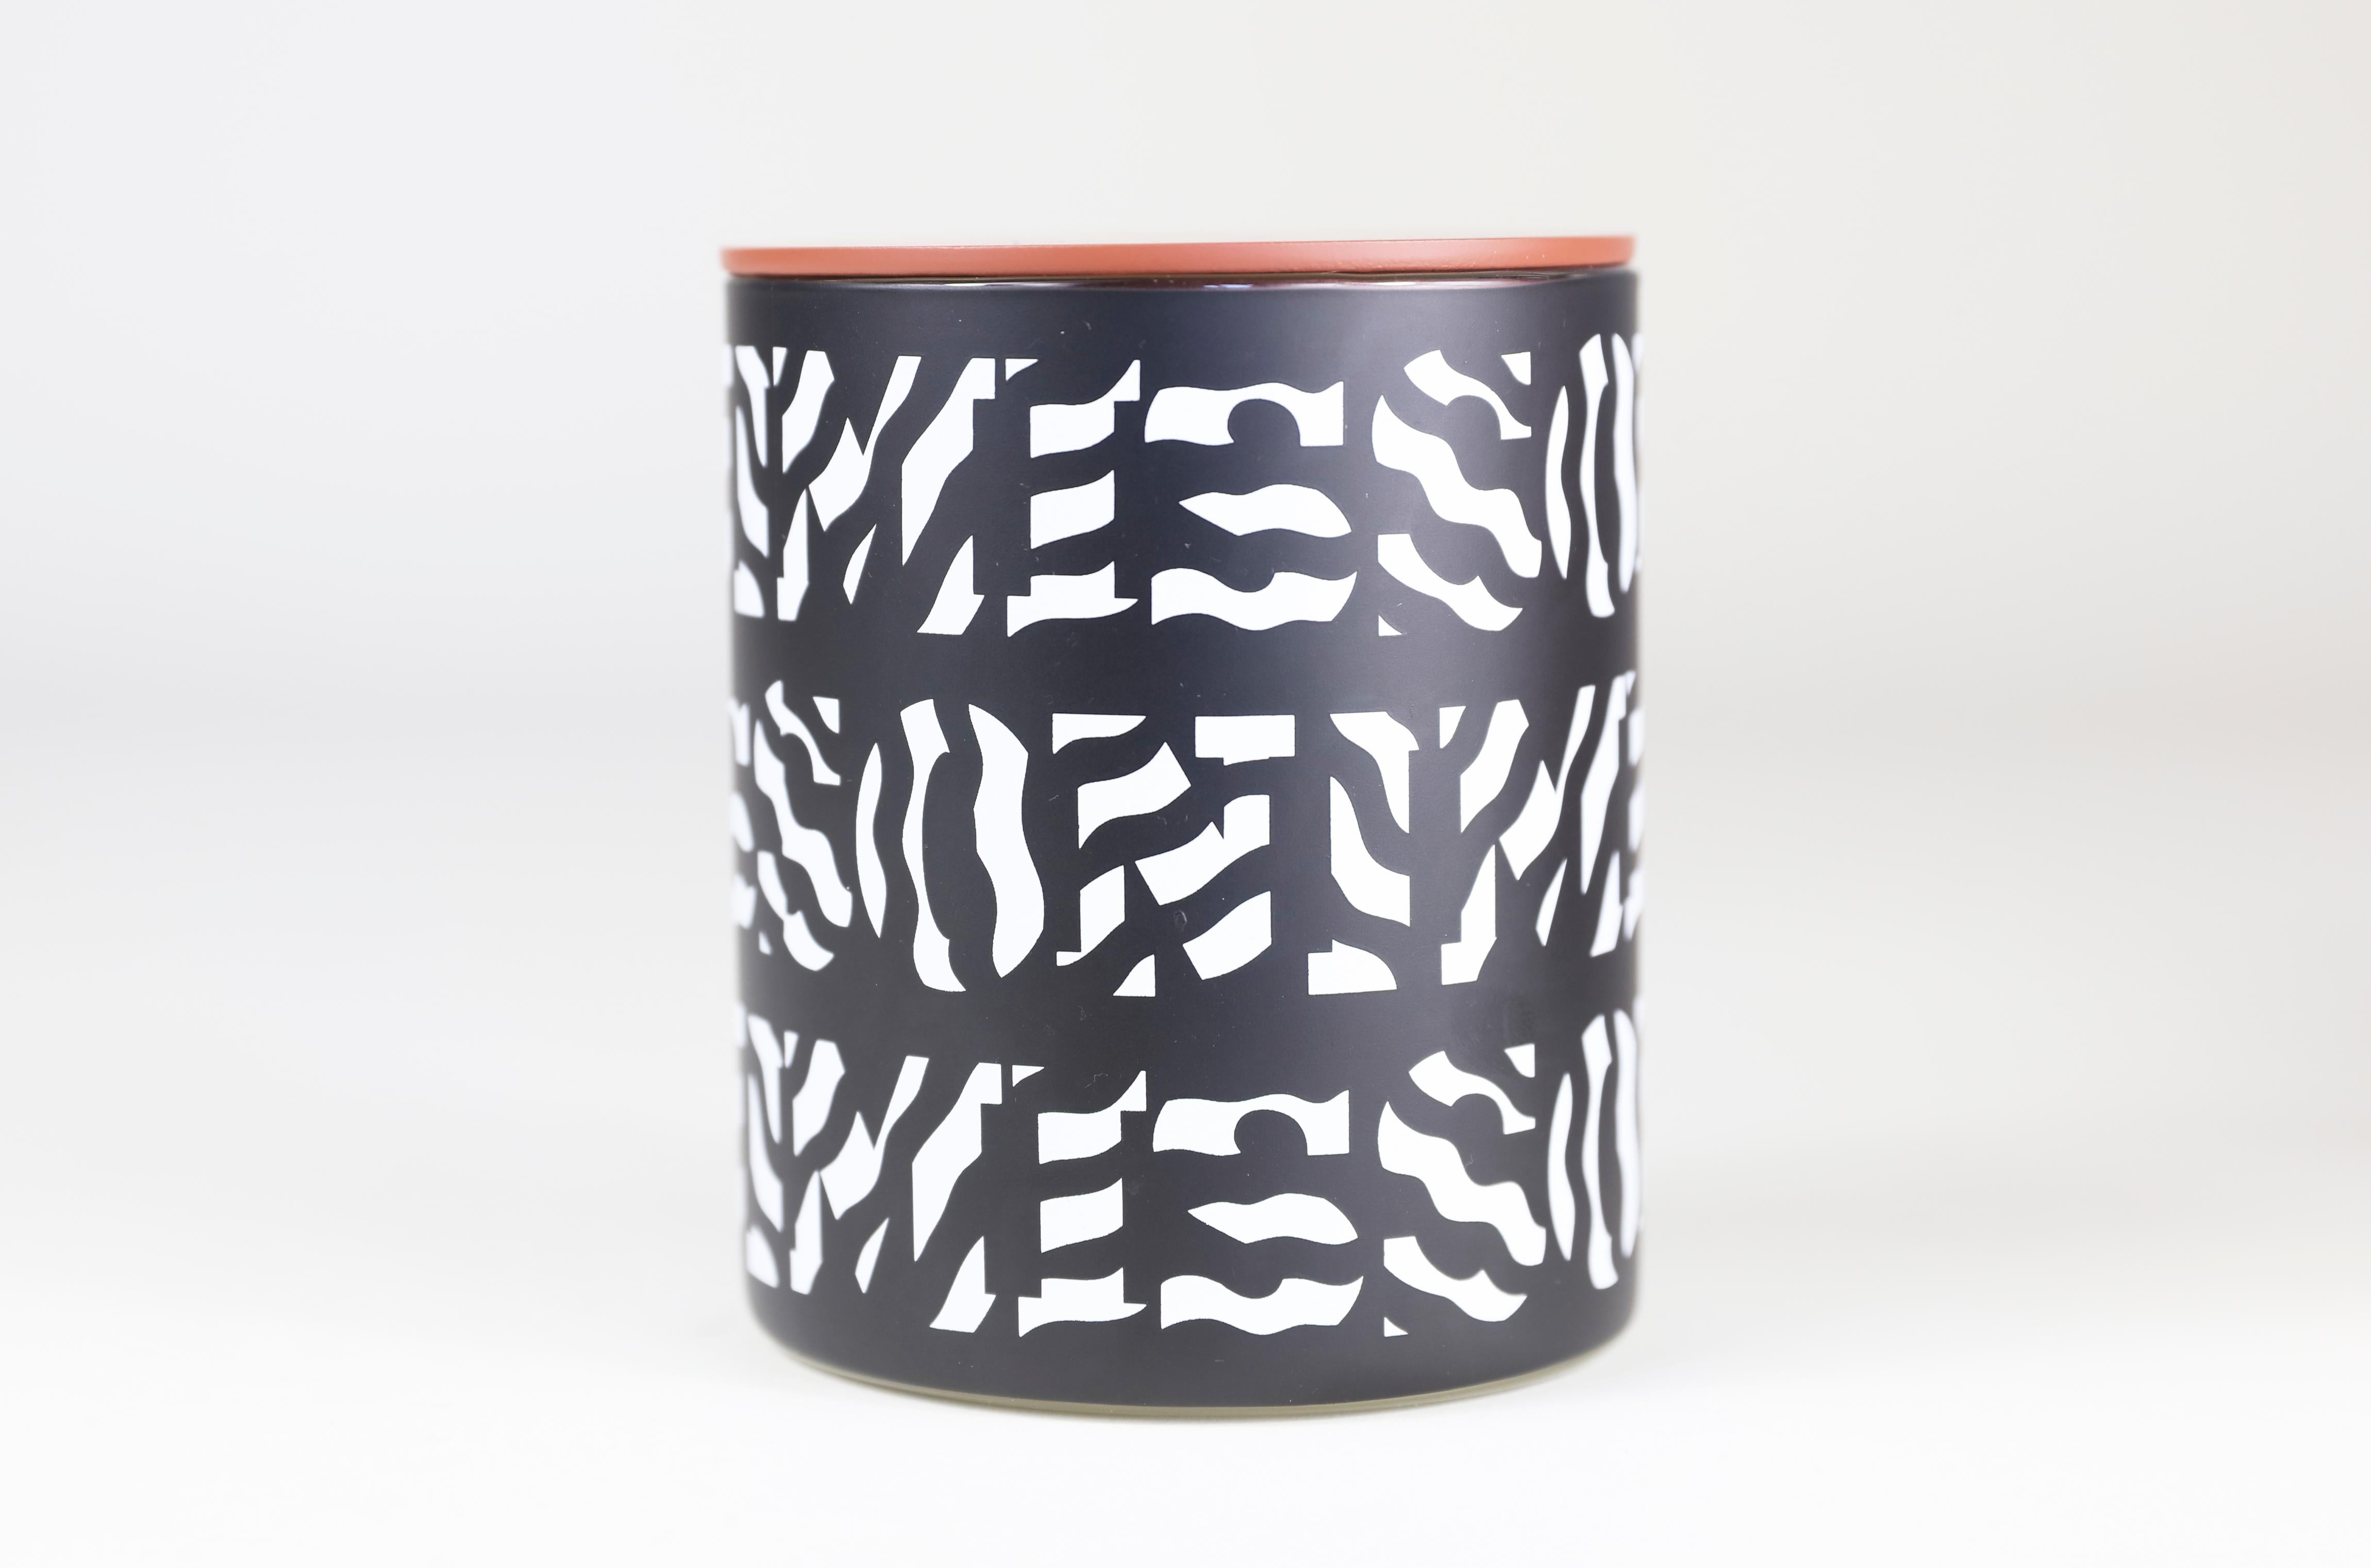 Missoni Bianconero Candle - scents of Tarocco orange and bay leaves blended with crushed peppercorn and warm olive wood.